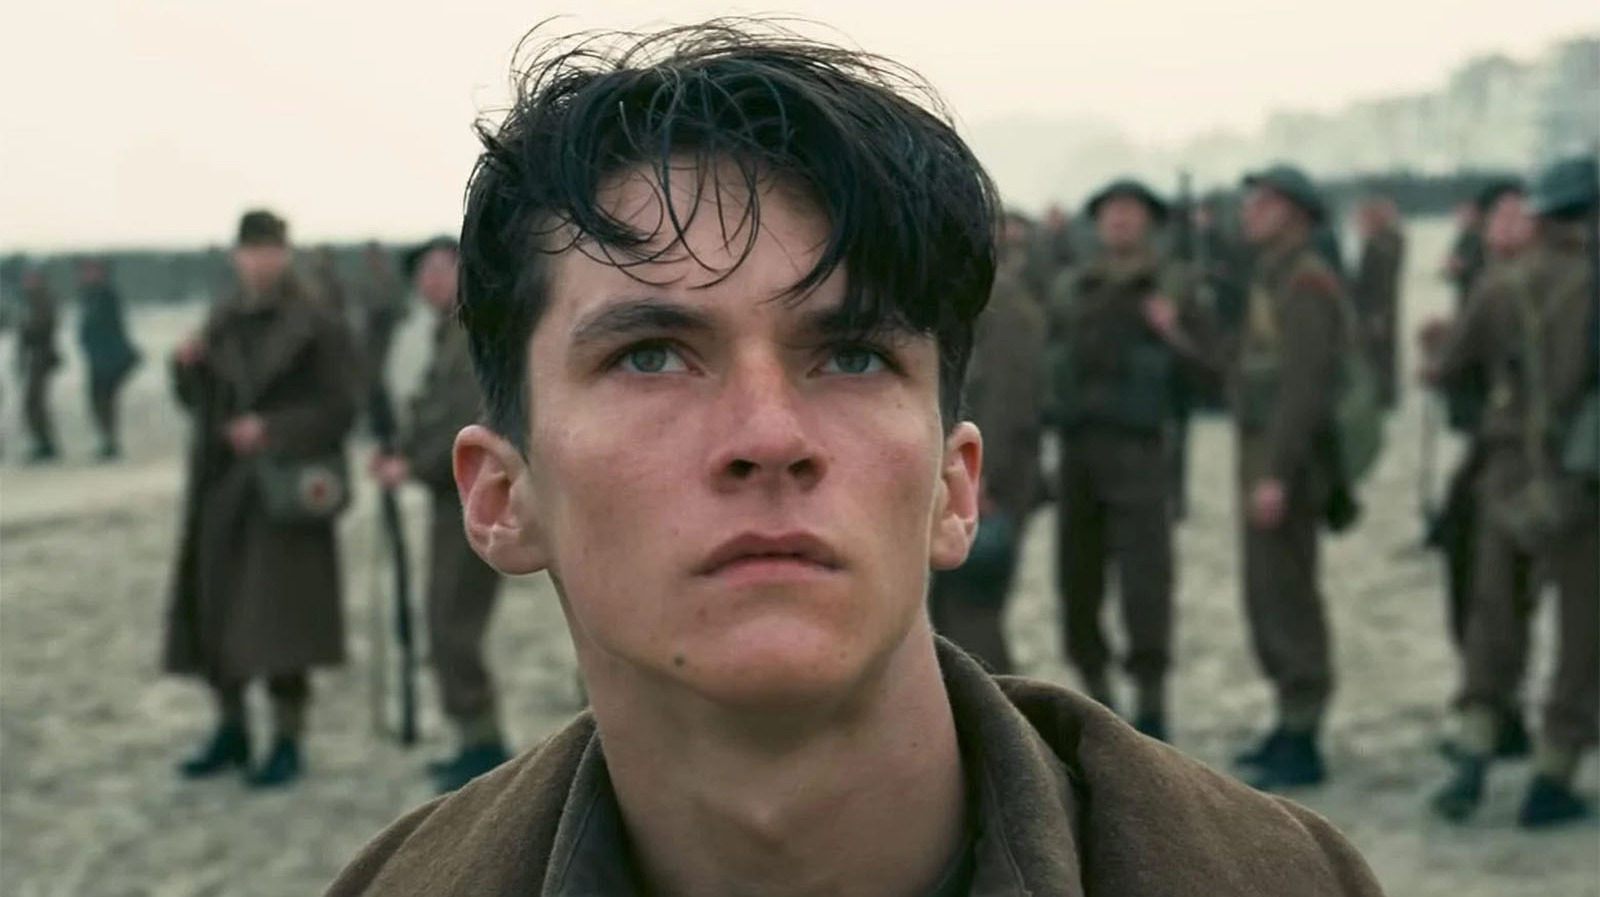 #Christopher Nolan’s Dunkirk Is A Feast Of A Film That’s Worth Revisiting